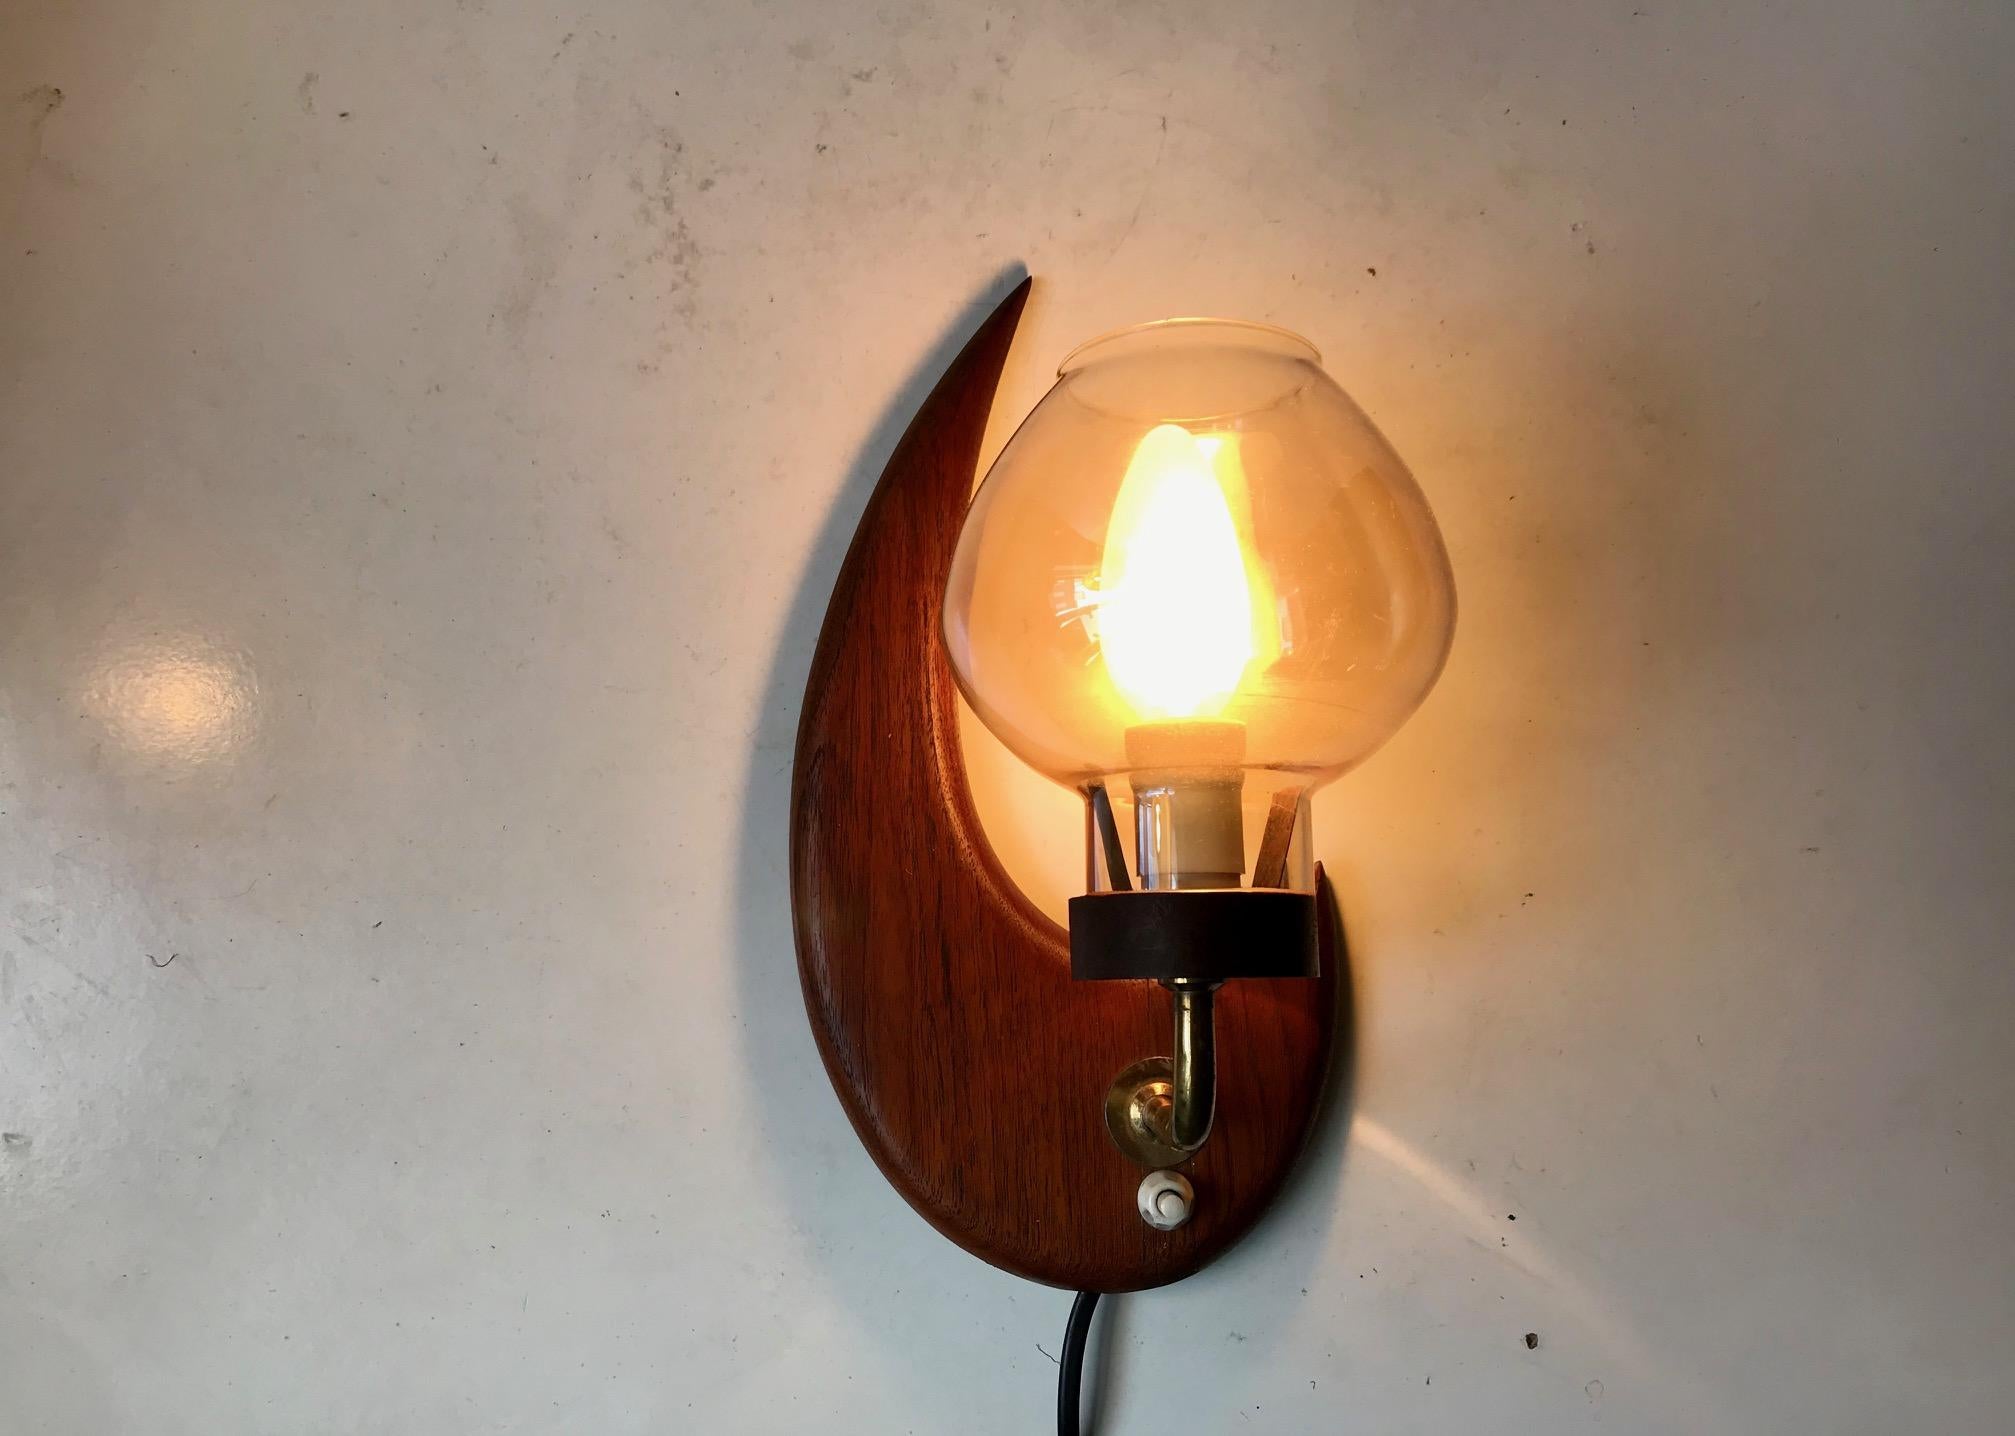 Moon shaped fixed wall light composed of solid teak, brass and smoke glass. Made from excess furniture wood during the early 1960s by an anonymous Scandinavian maker. Please notice that it has a hairline crack repair. Barely visible to the bottom of